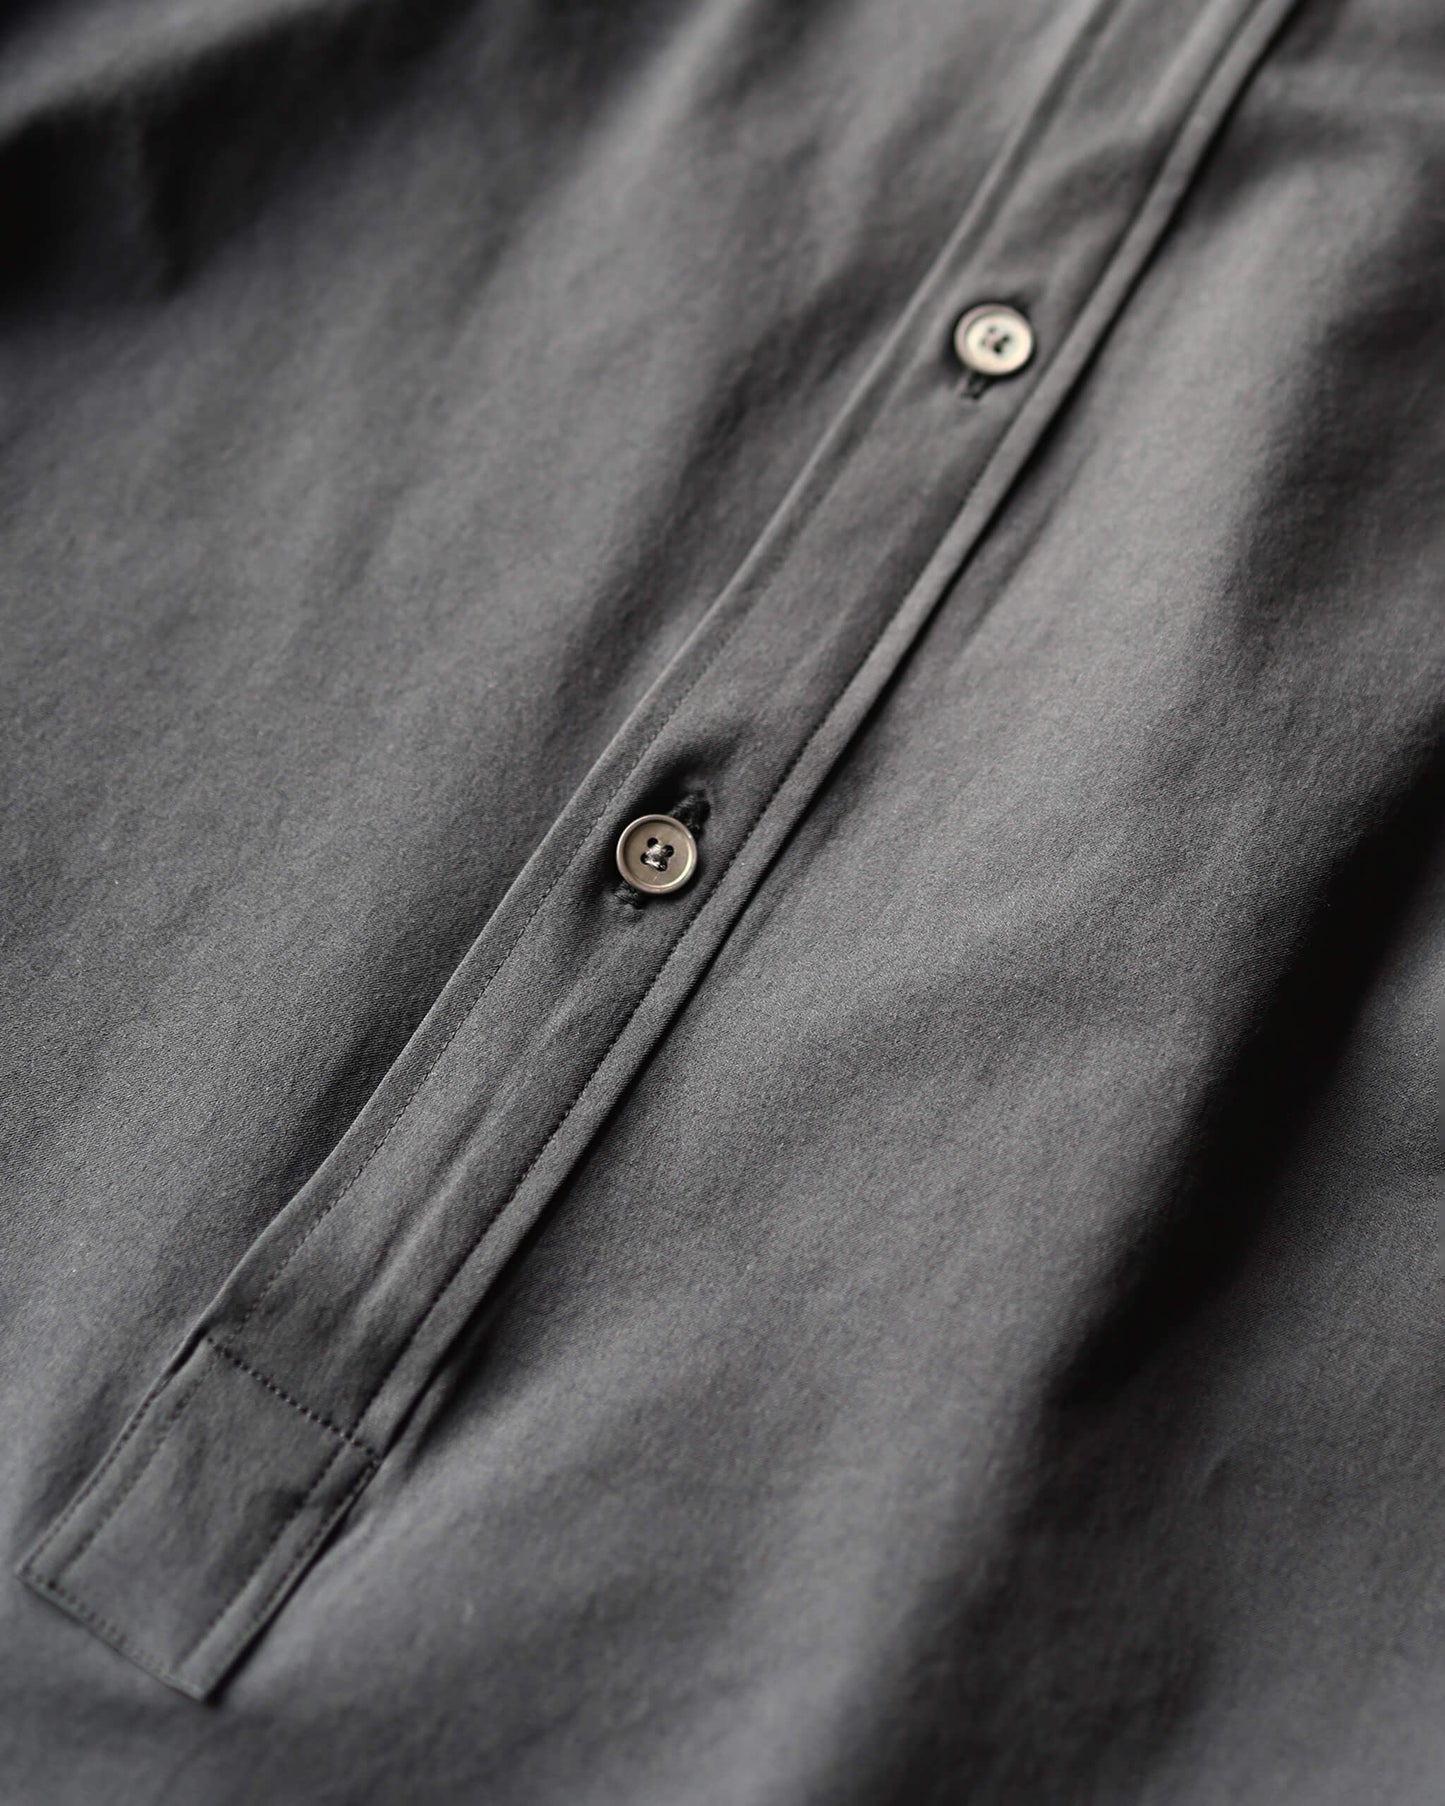 [Exclusive] Fully dull stretch - Stand collar shirt "Black"